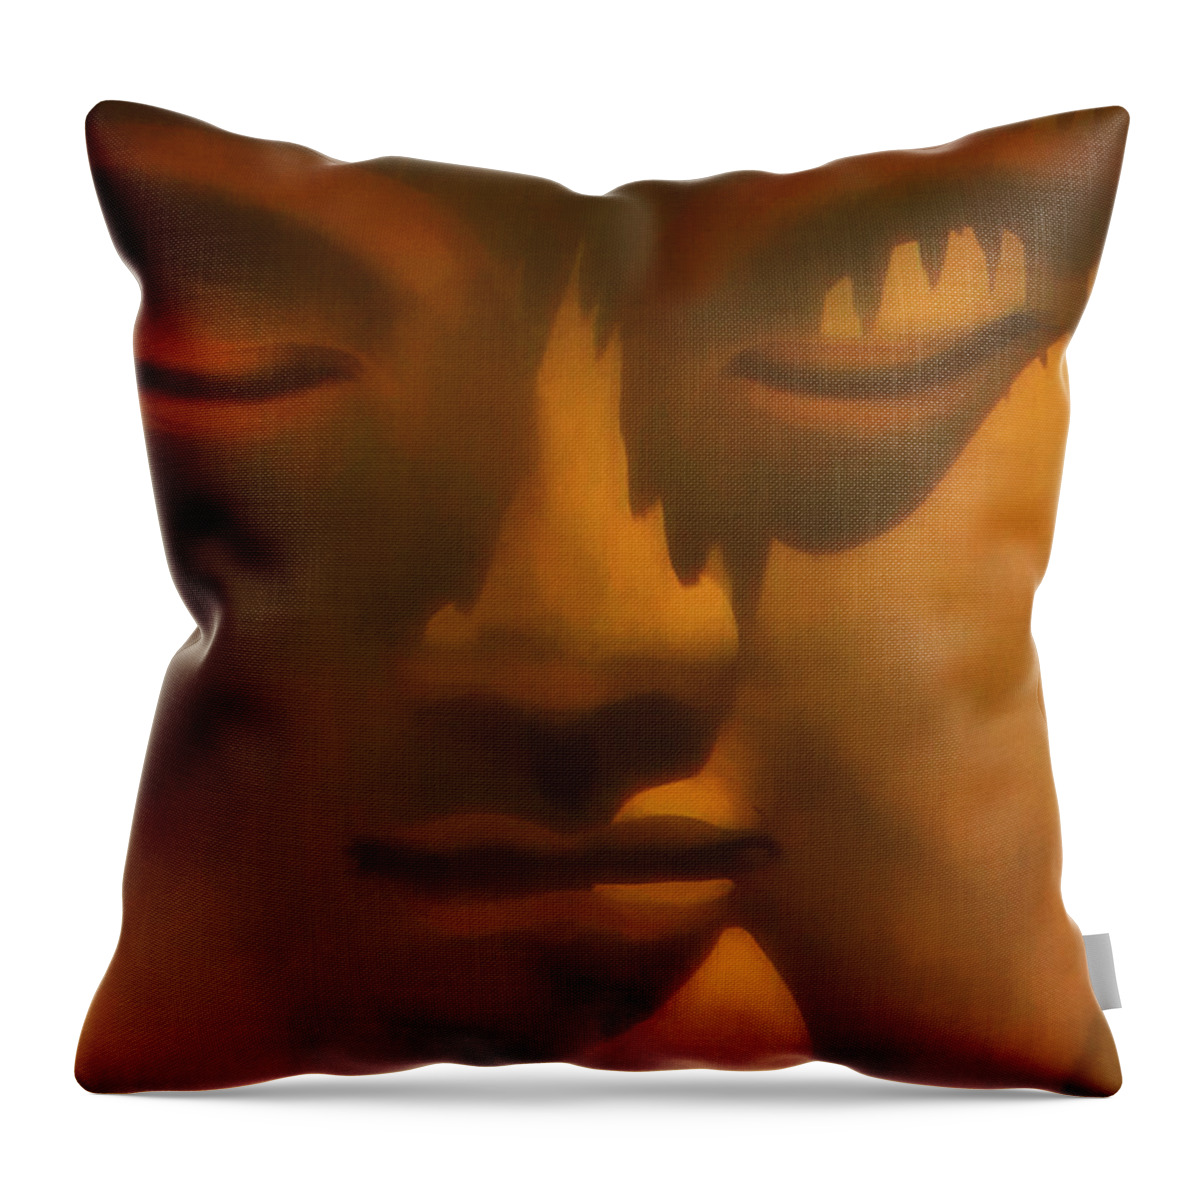 Buddha Throw Pillow featuring the photograph Buddha At Rest by Kandy Hurley